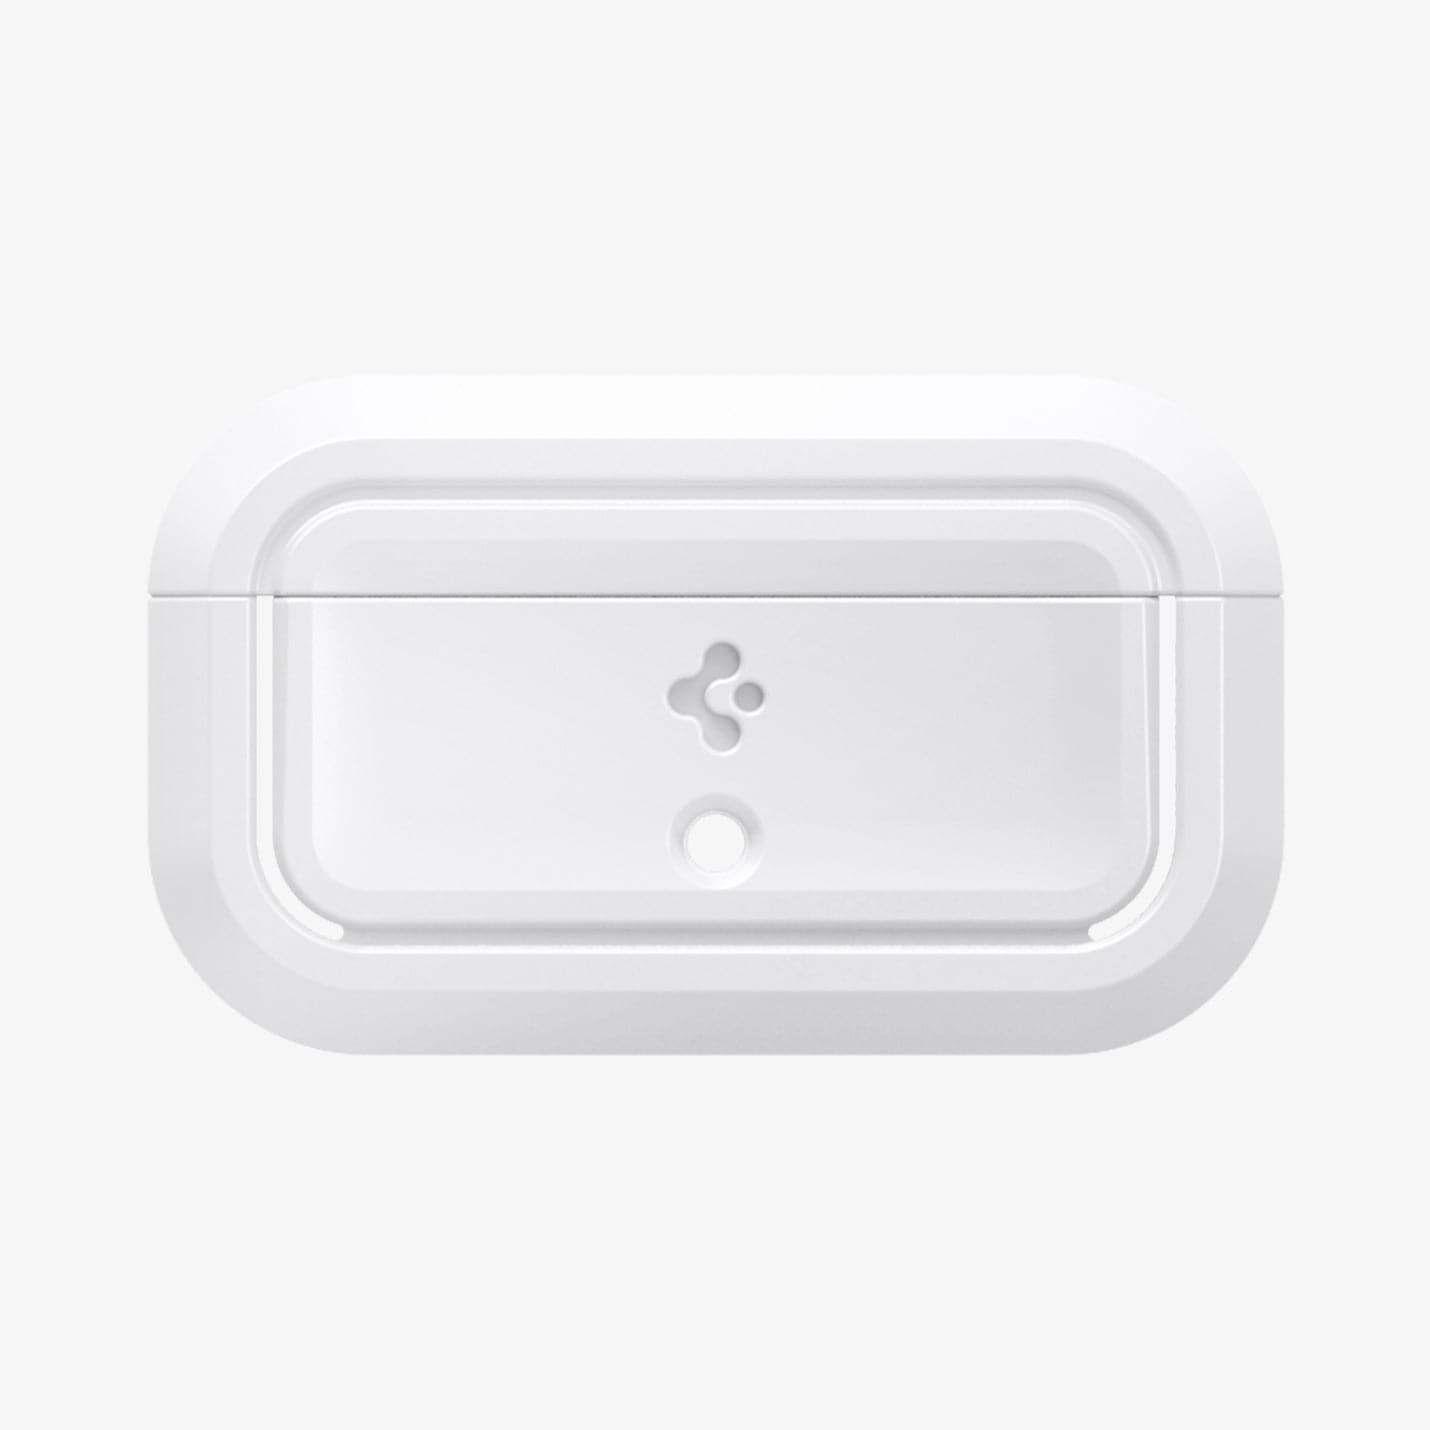 ASD06090 - Apple AirPods Pro / AirPods Pro 2 Case Lock Fit in white showing the front